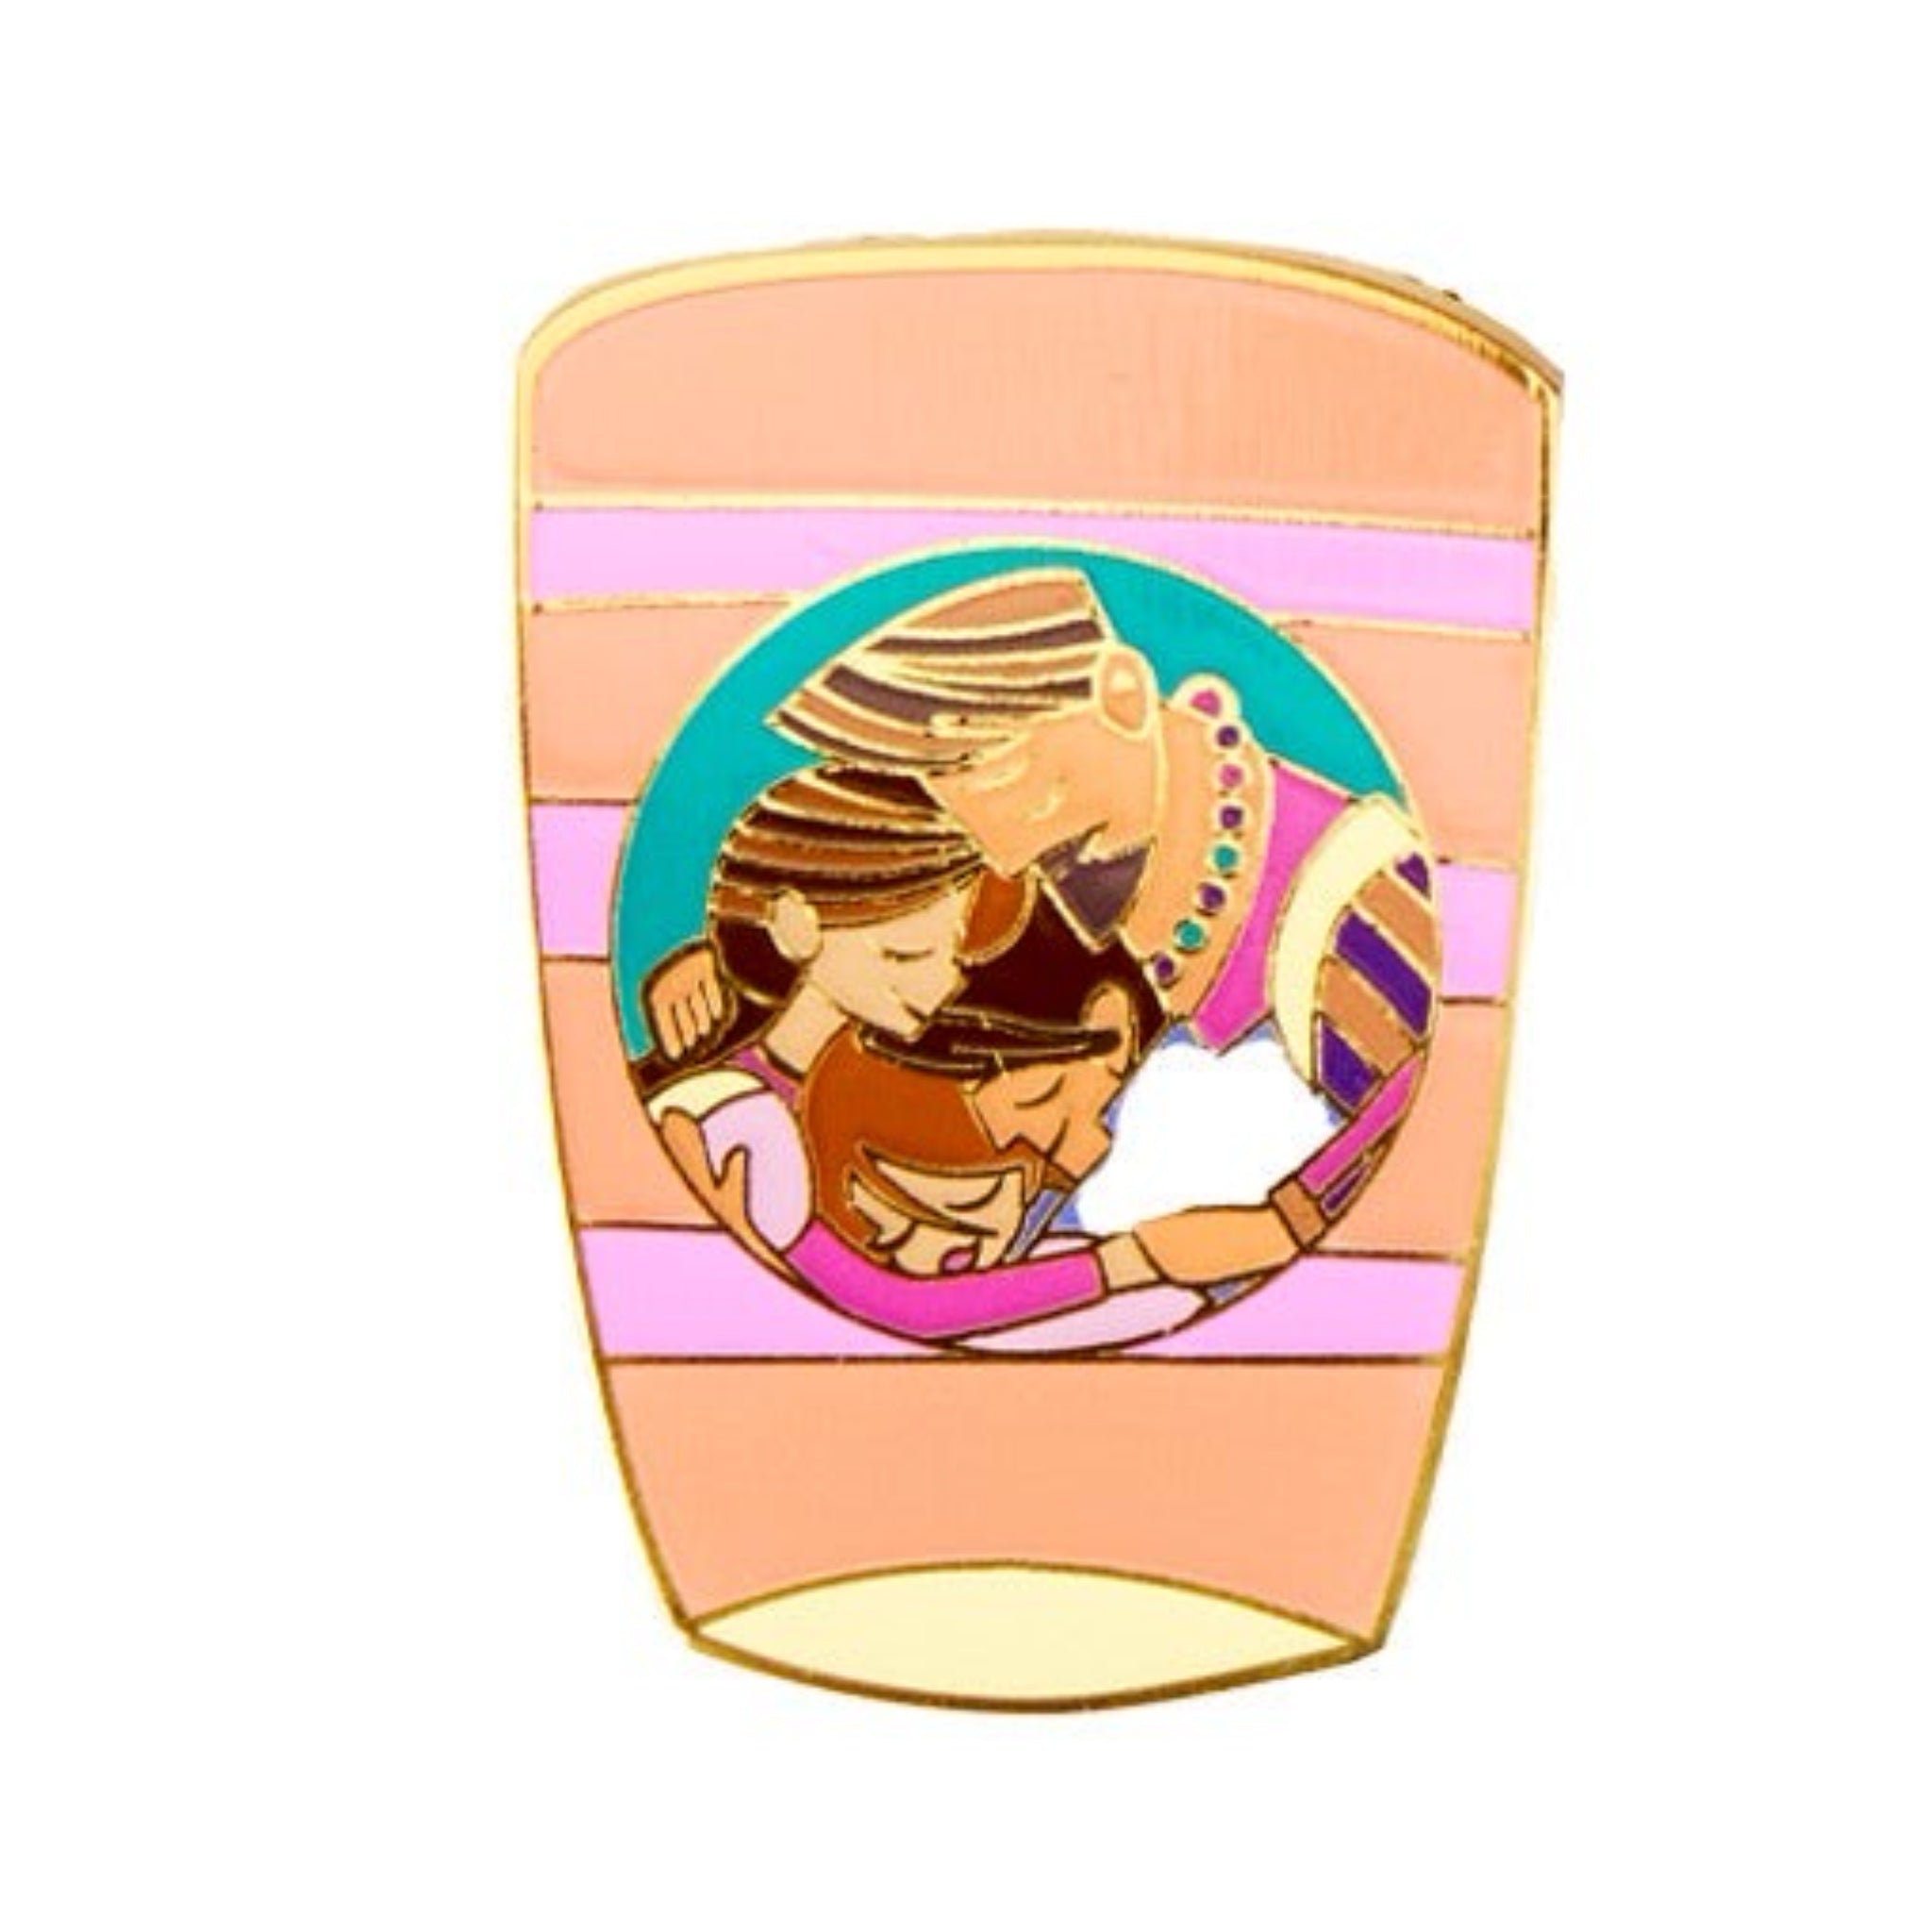 Loungefly Disney Tangled Lanterns Blind Box Pin. Available at Blue Culture Tees!